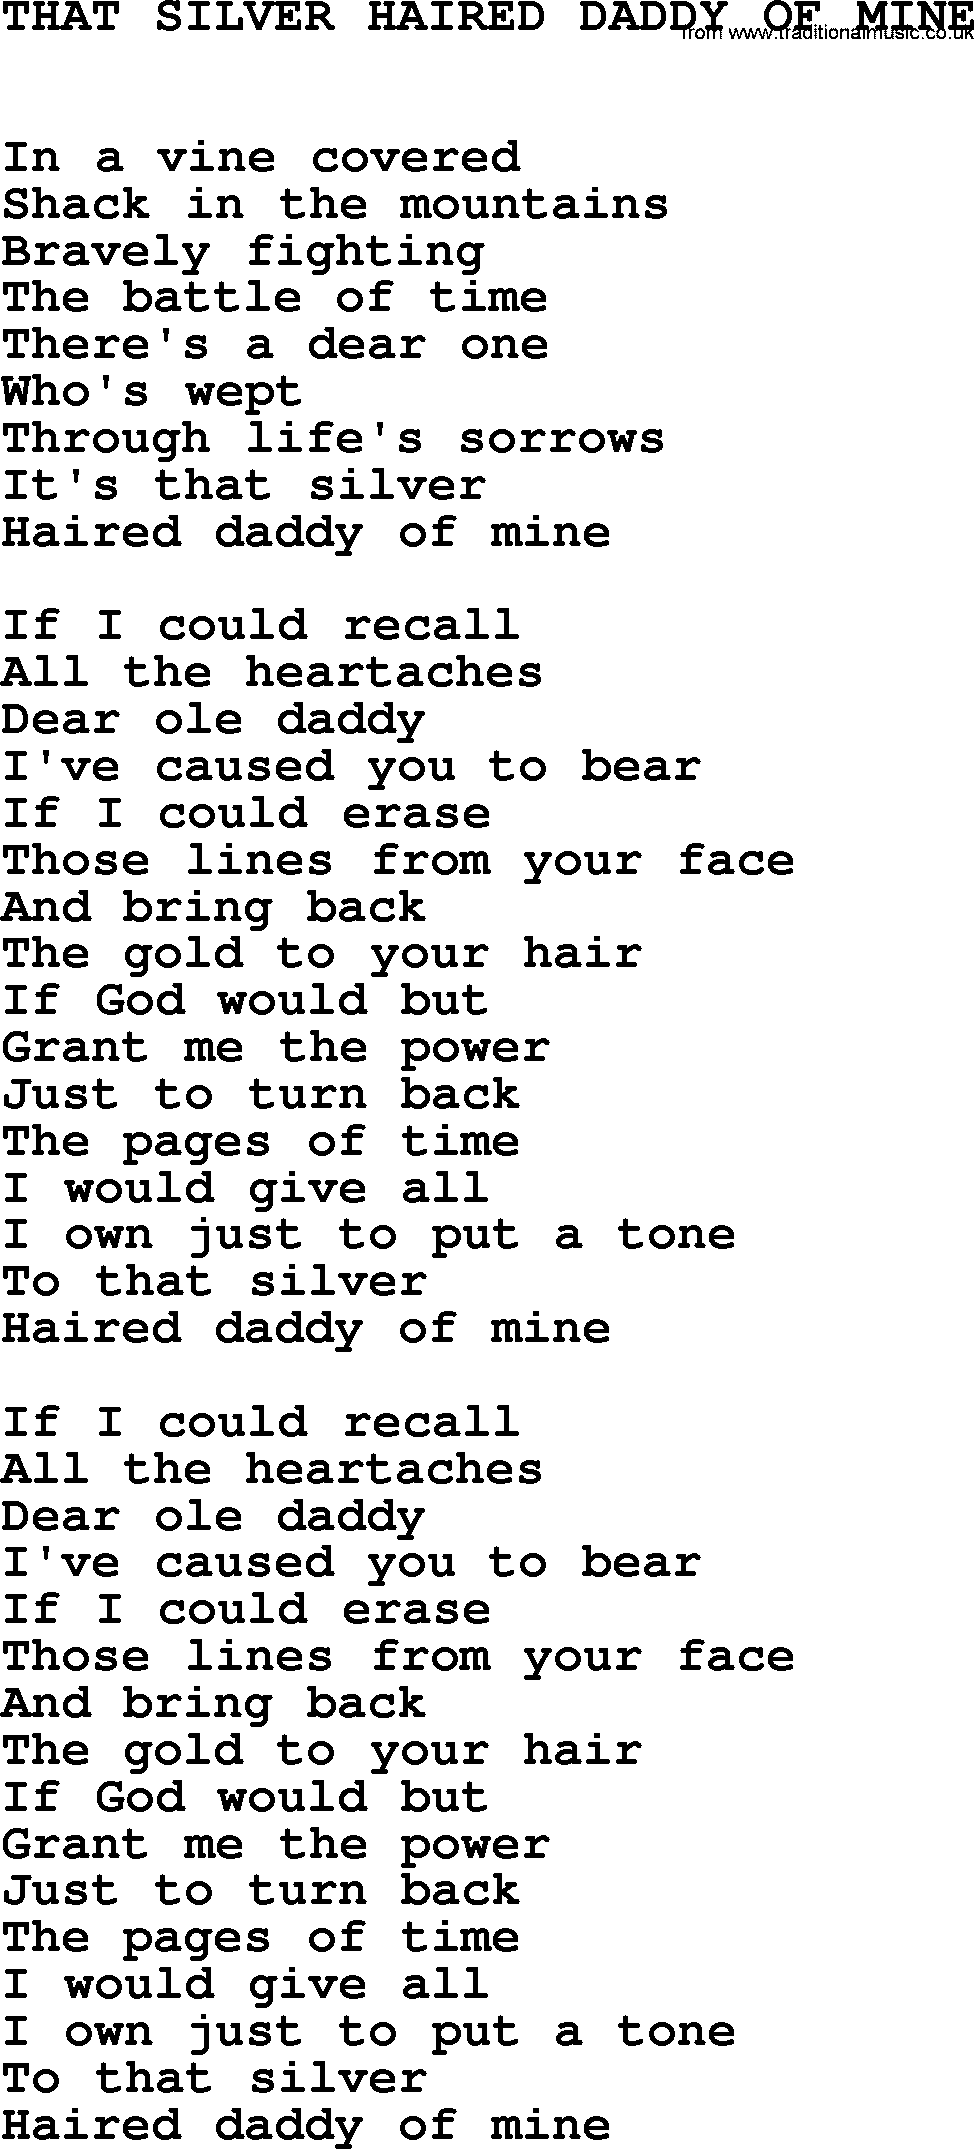 Johnny Cash song That Silver Haired Daddy Of Mine.txt lyrics